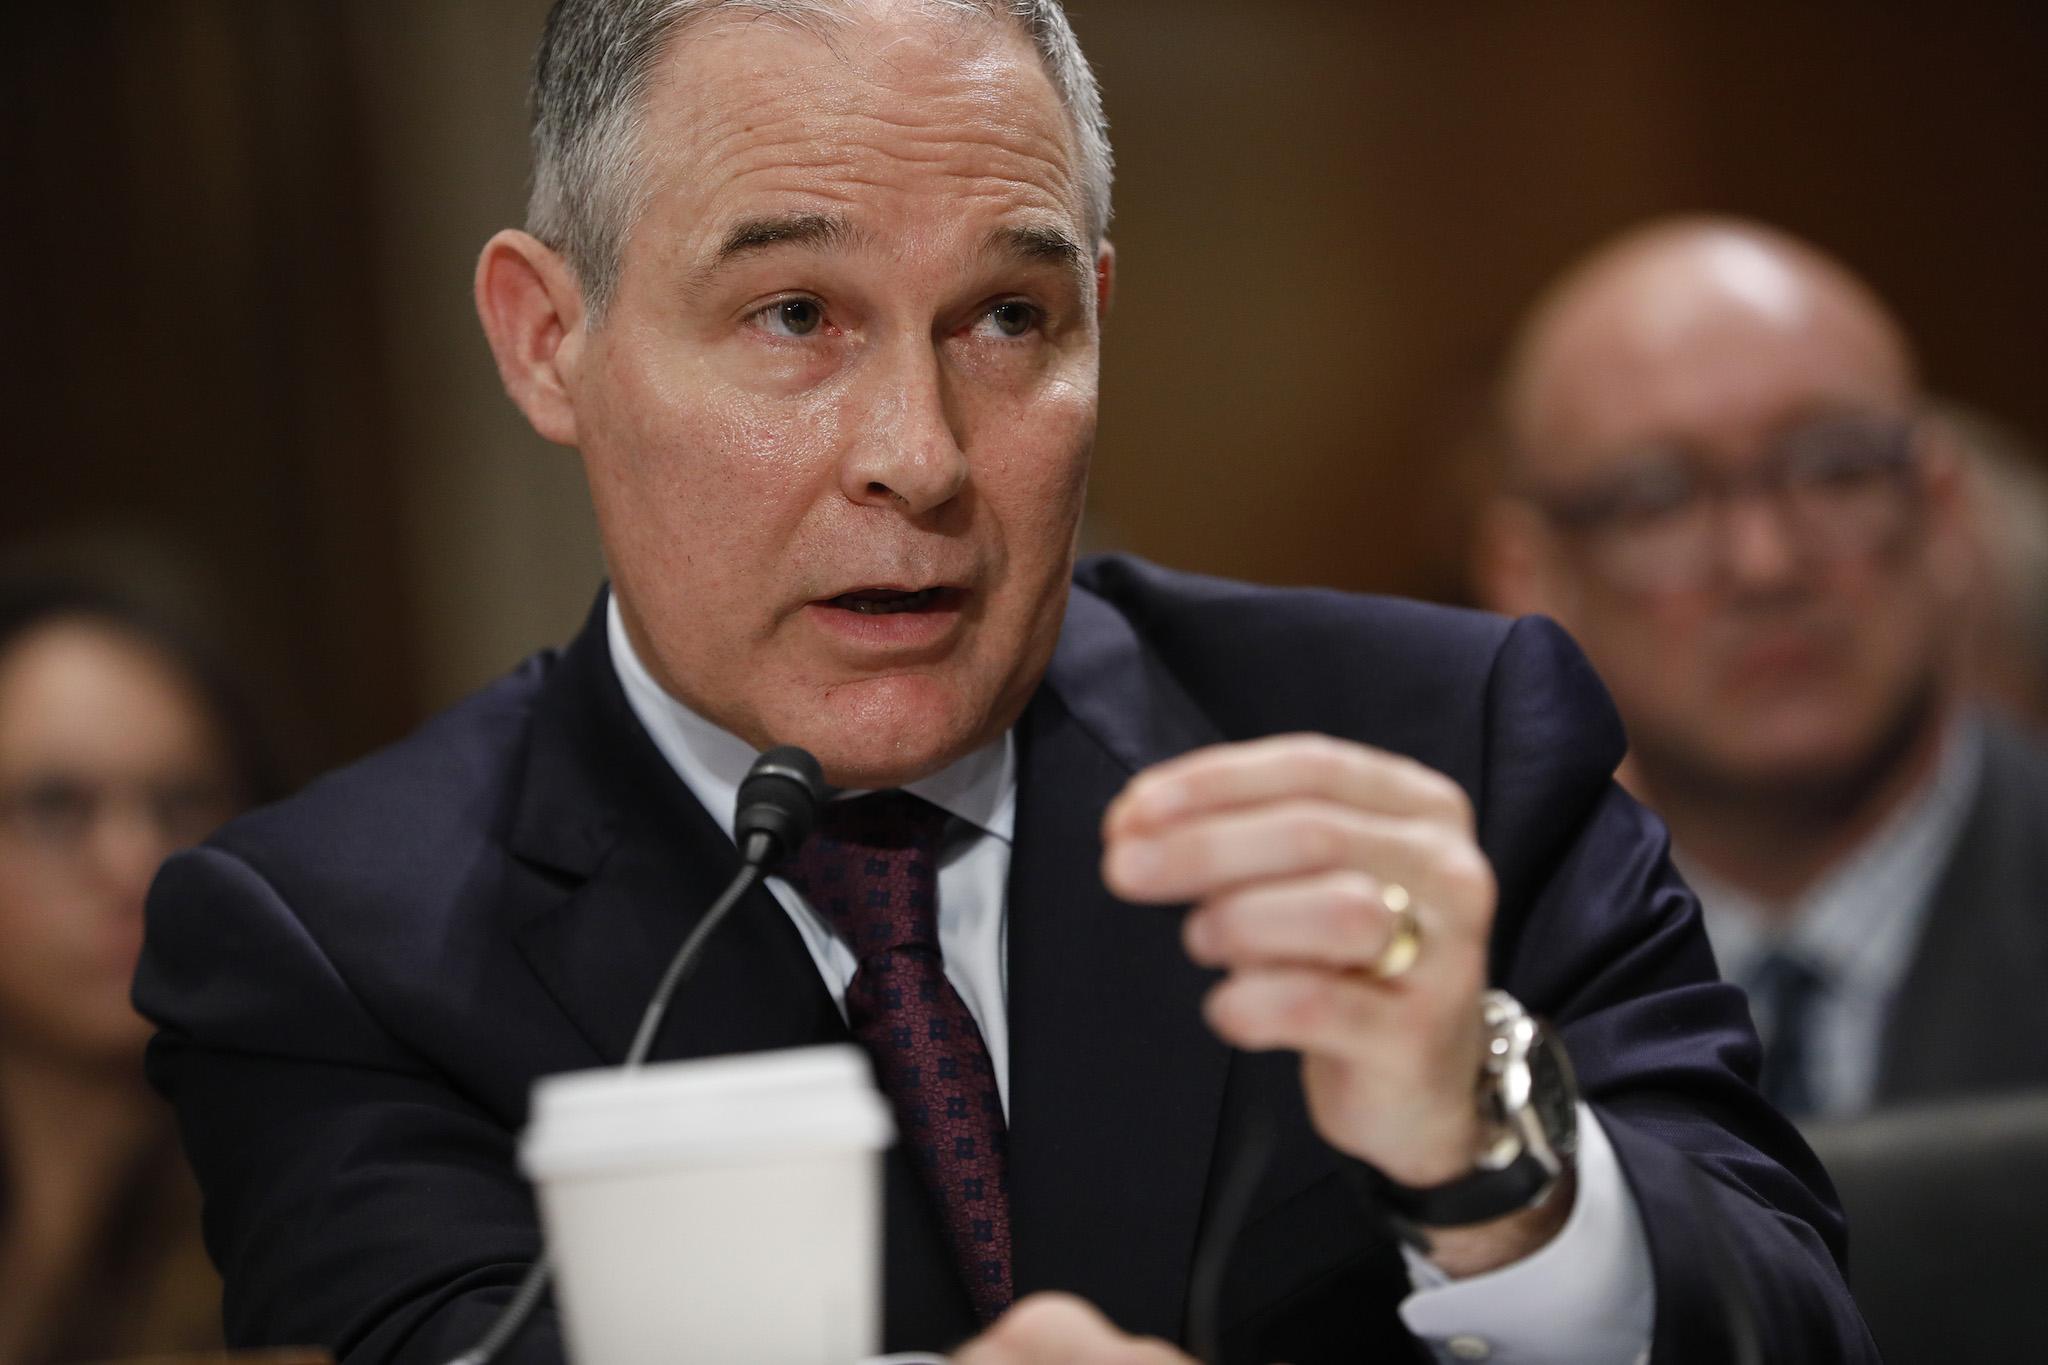 Scott Pruitt denied carbon dioxide was a 'primary contributor' to global warming